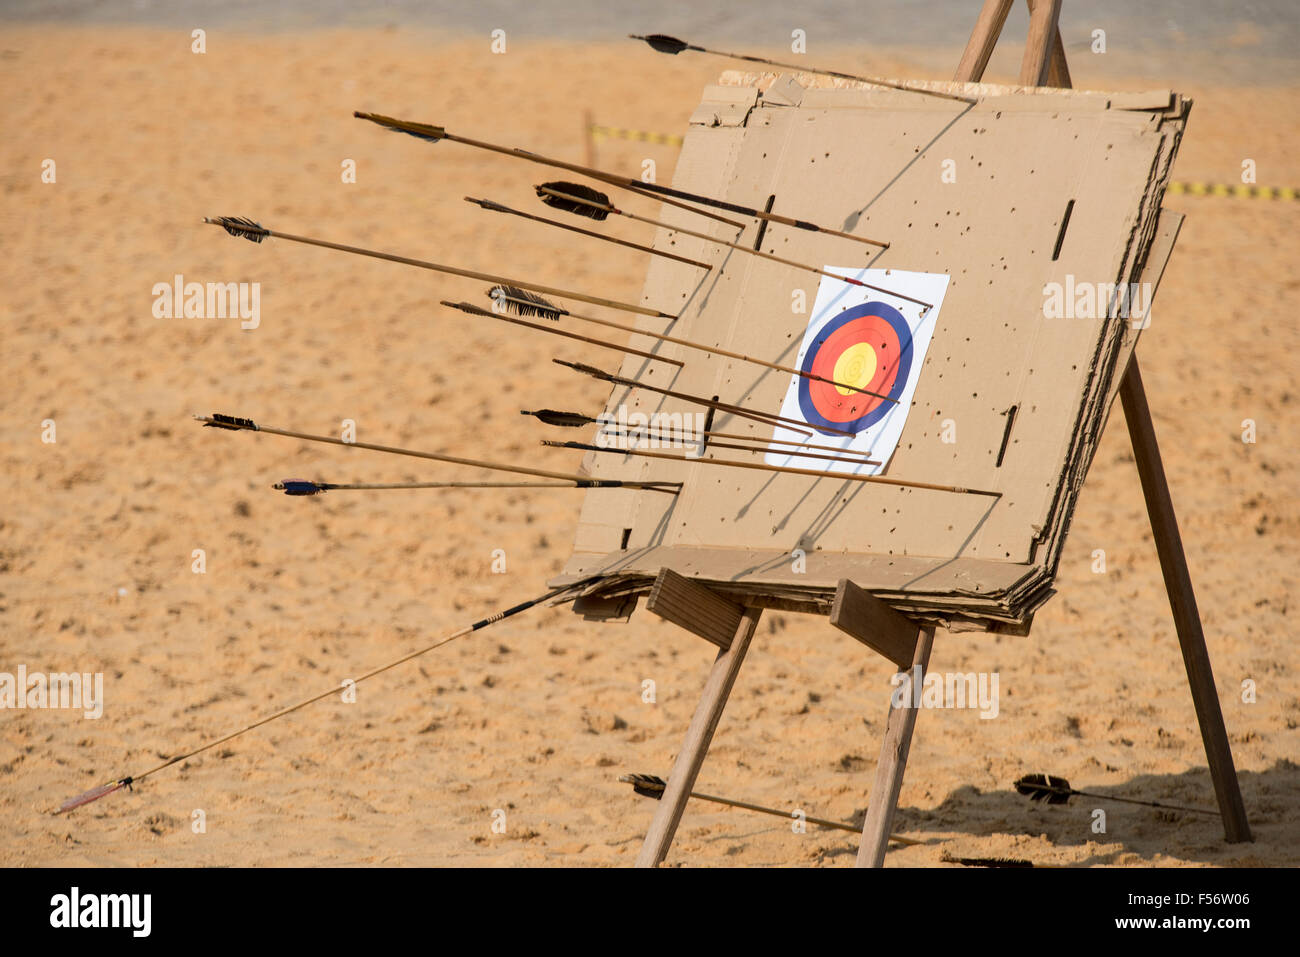 Palmas, Brtazil. 28th Oct, 2015. The archery target of cardboard boxes shows the variety of arrows in use at the International Indigenous Games, in the city of Palmas, Tocantins State, Brazil. Credit:  Sue Cunningham Photographic/Alamy Live News Stock Photo